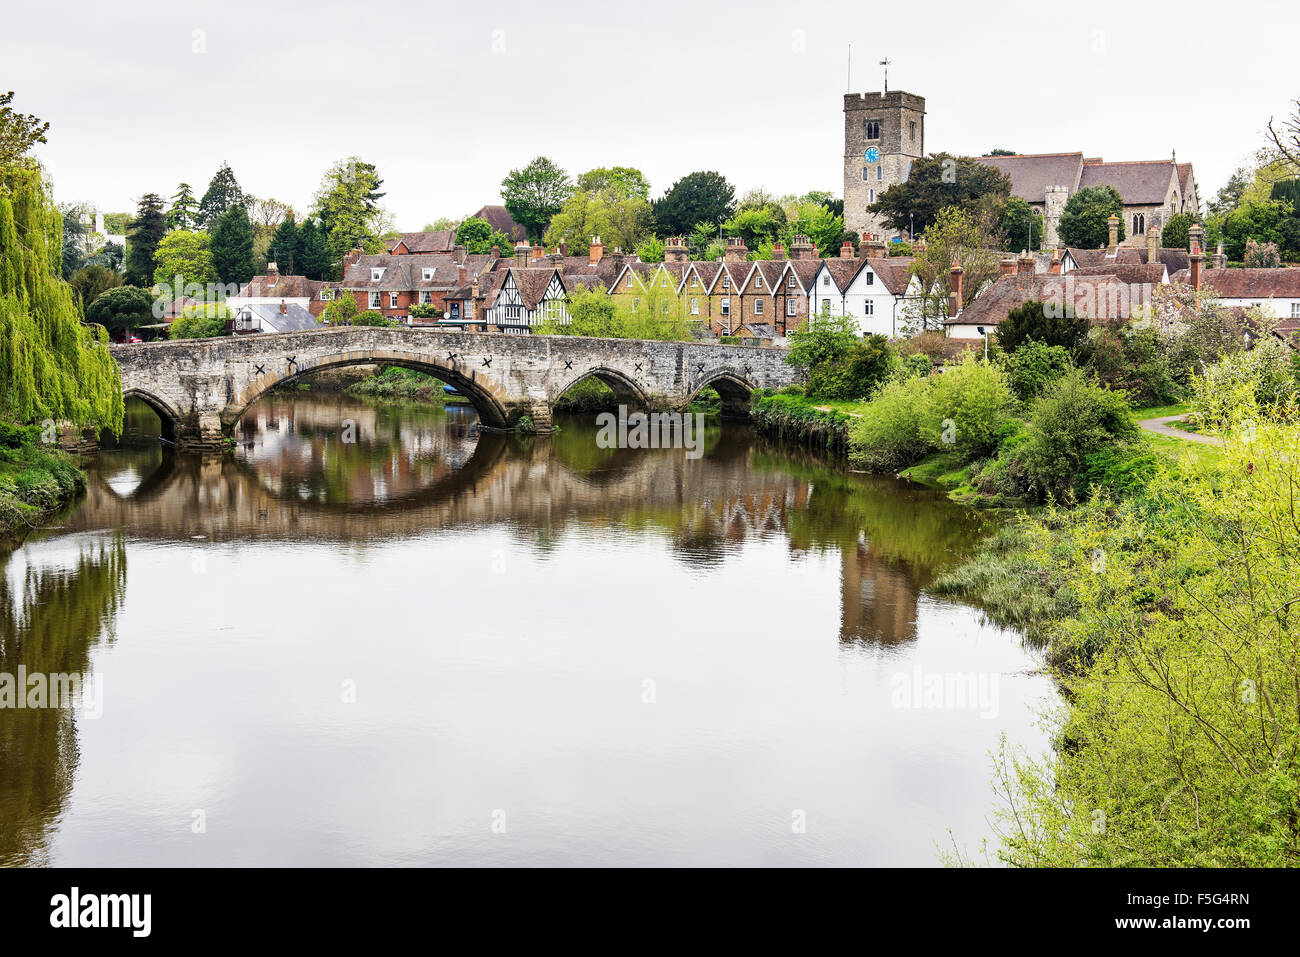 Aylesford e il fiume Medway Foto Stock